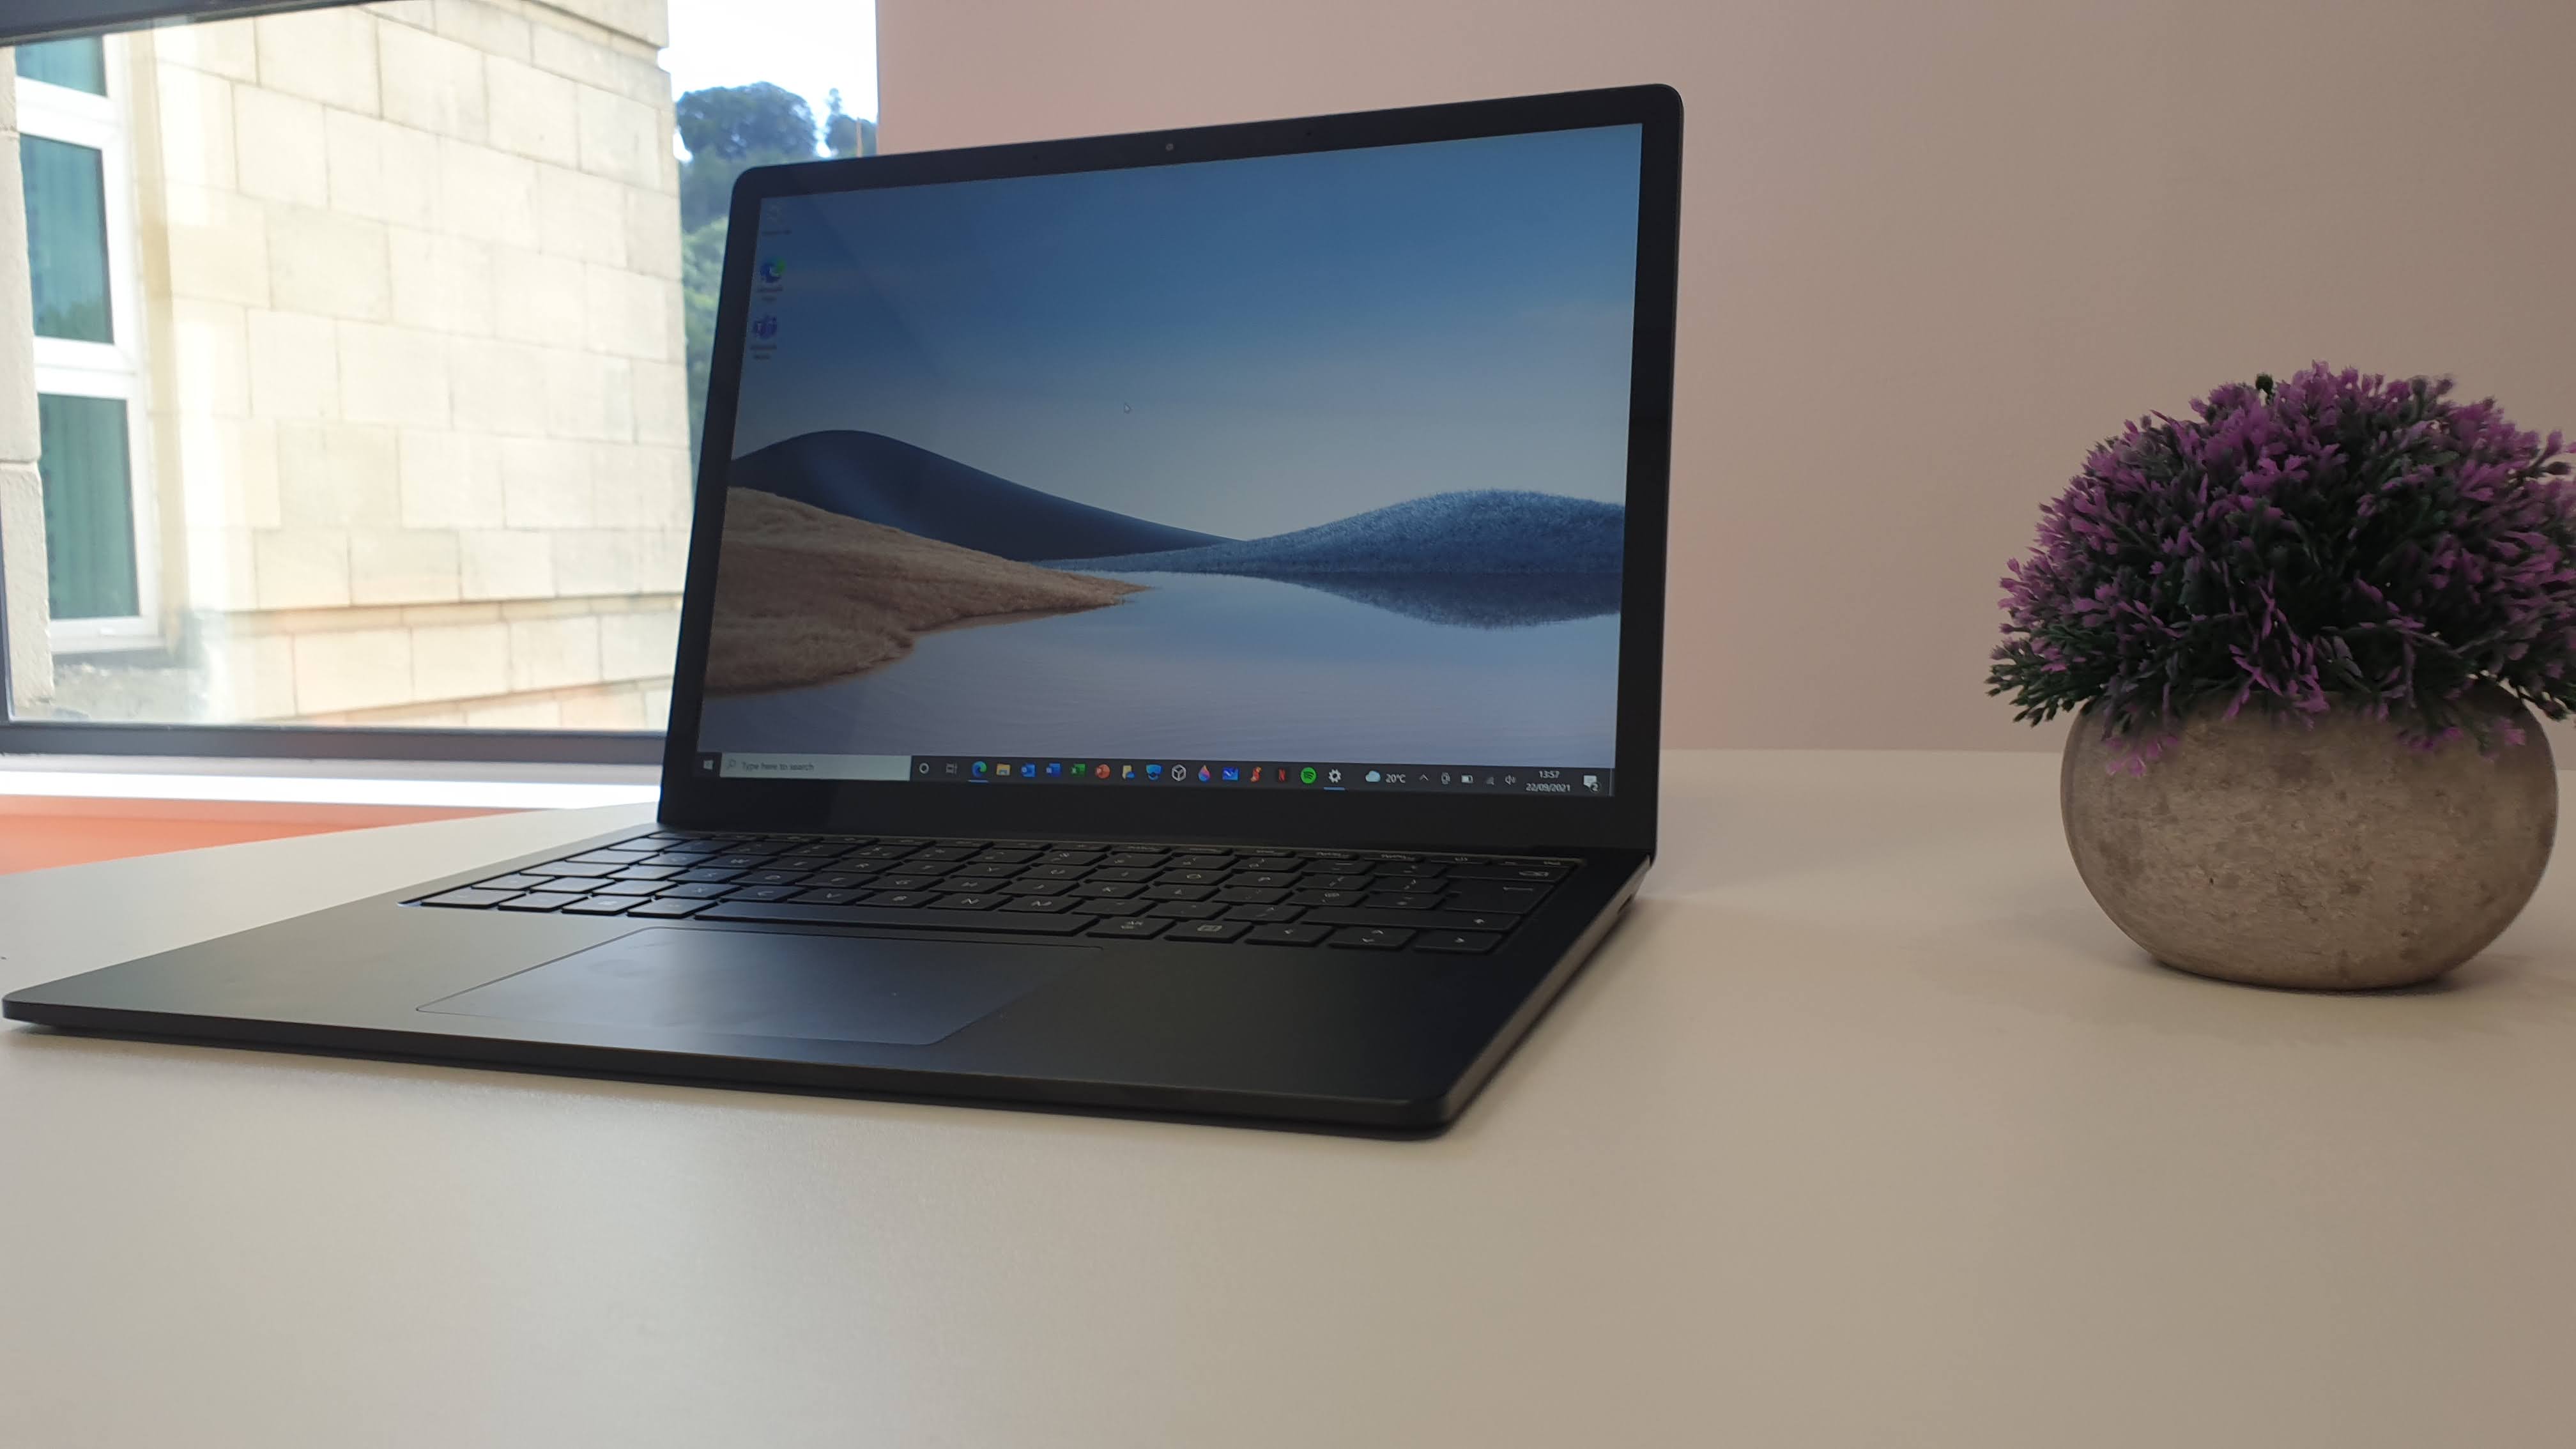 Surface Laptop 4 on a wooden desk in an office